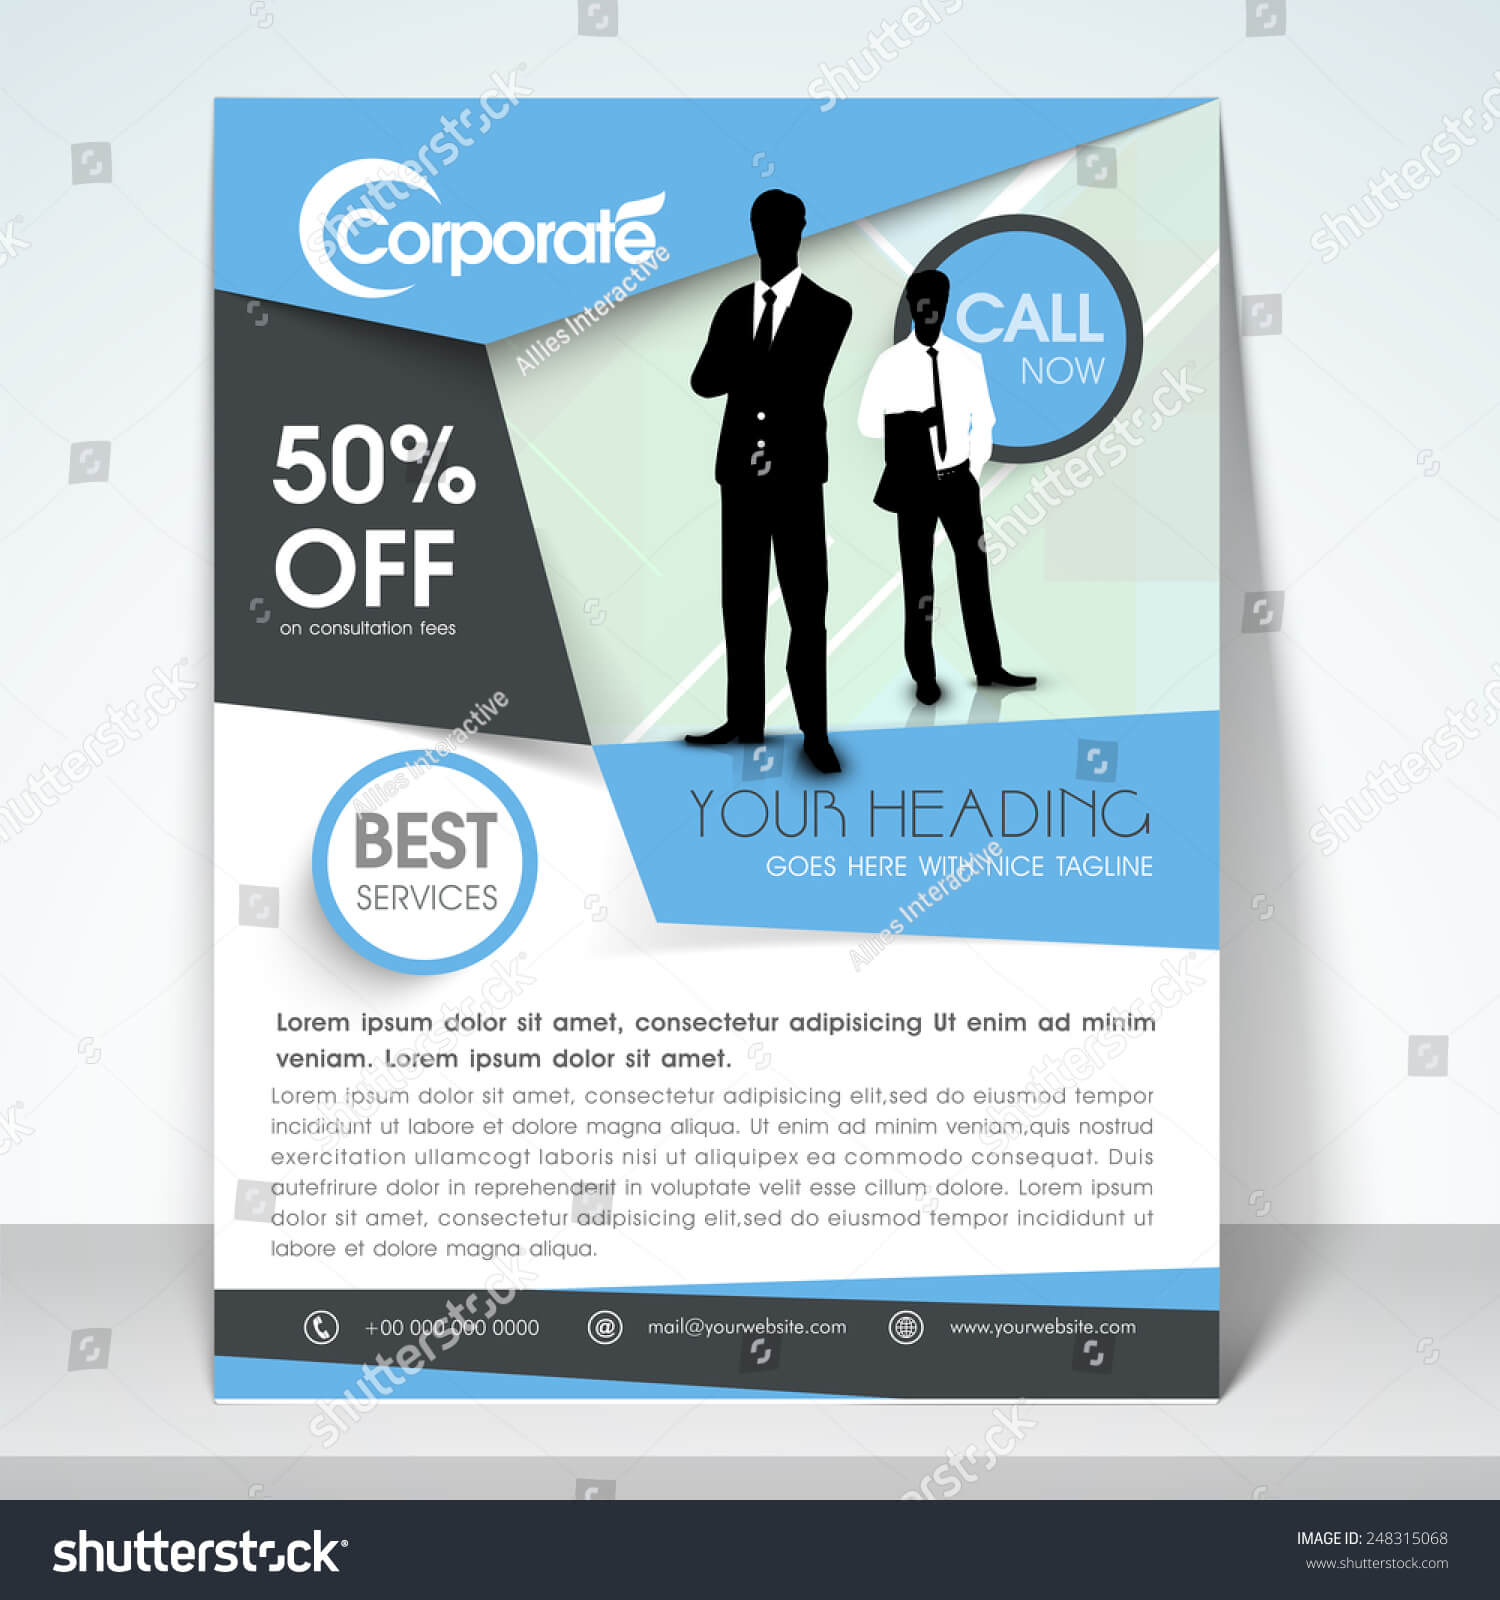 Best One Page Brochure Designs – Gisa With One Page Brochure Template